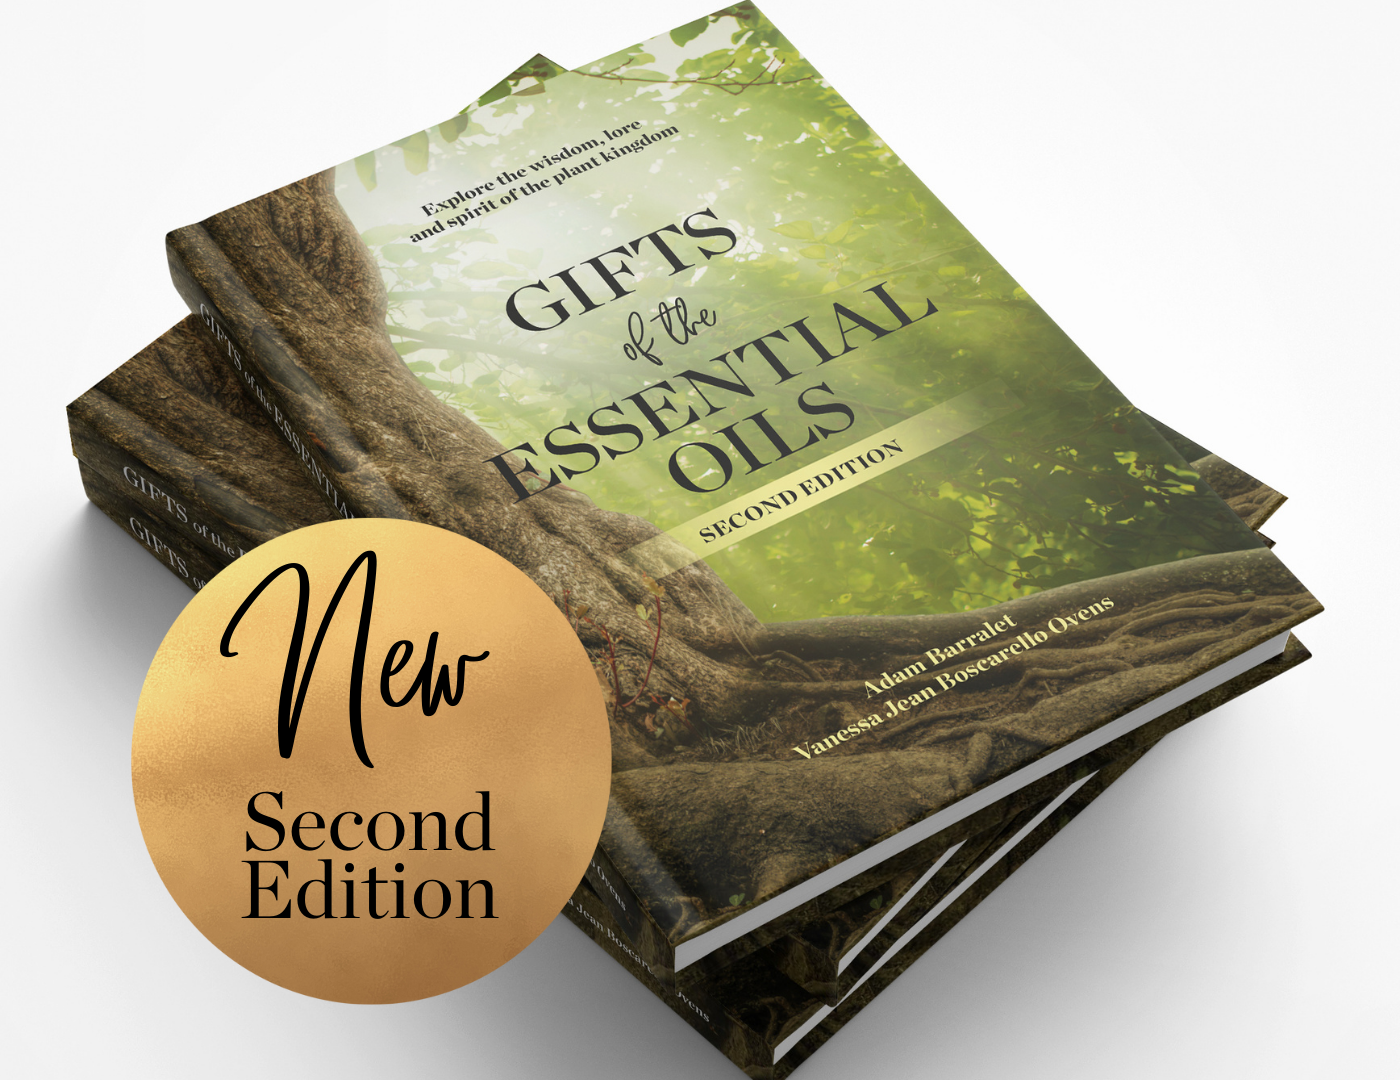 PRE-ORDER: Gifts of the Esserntial Oils - 2nd Edition